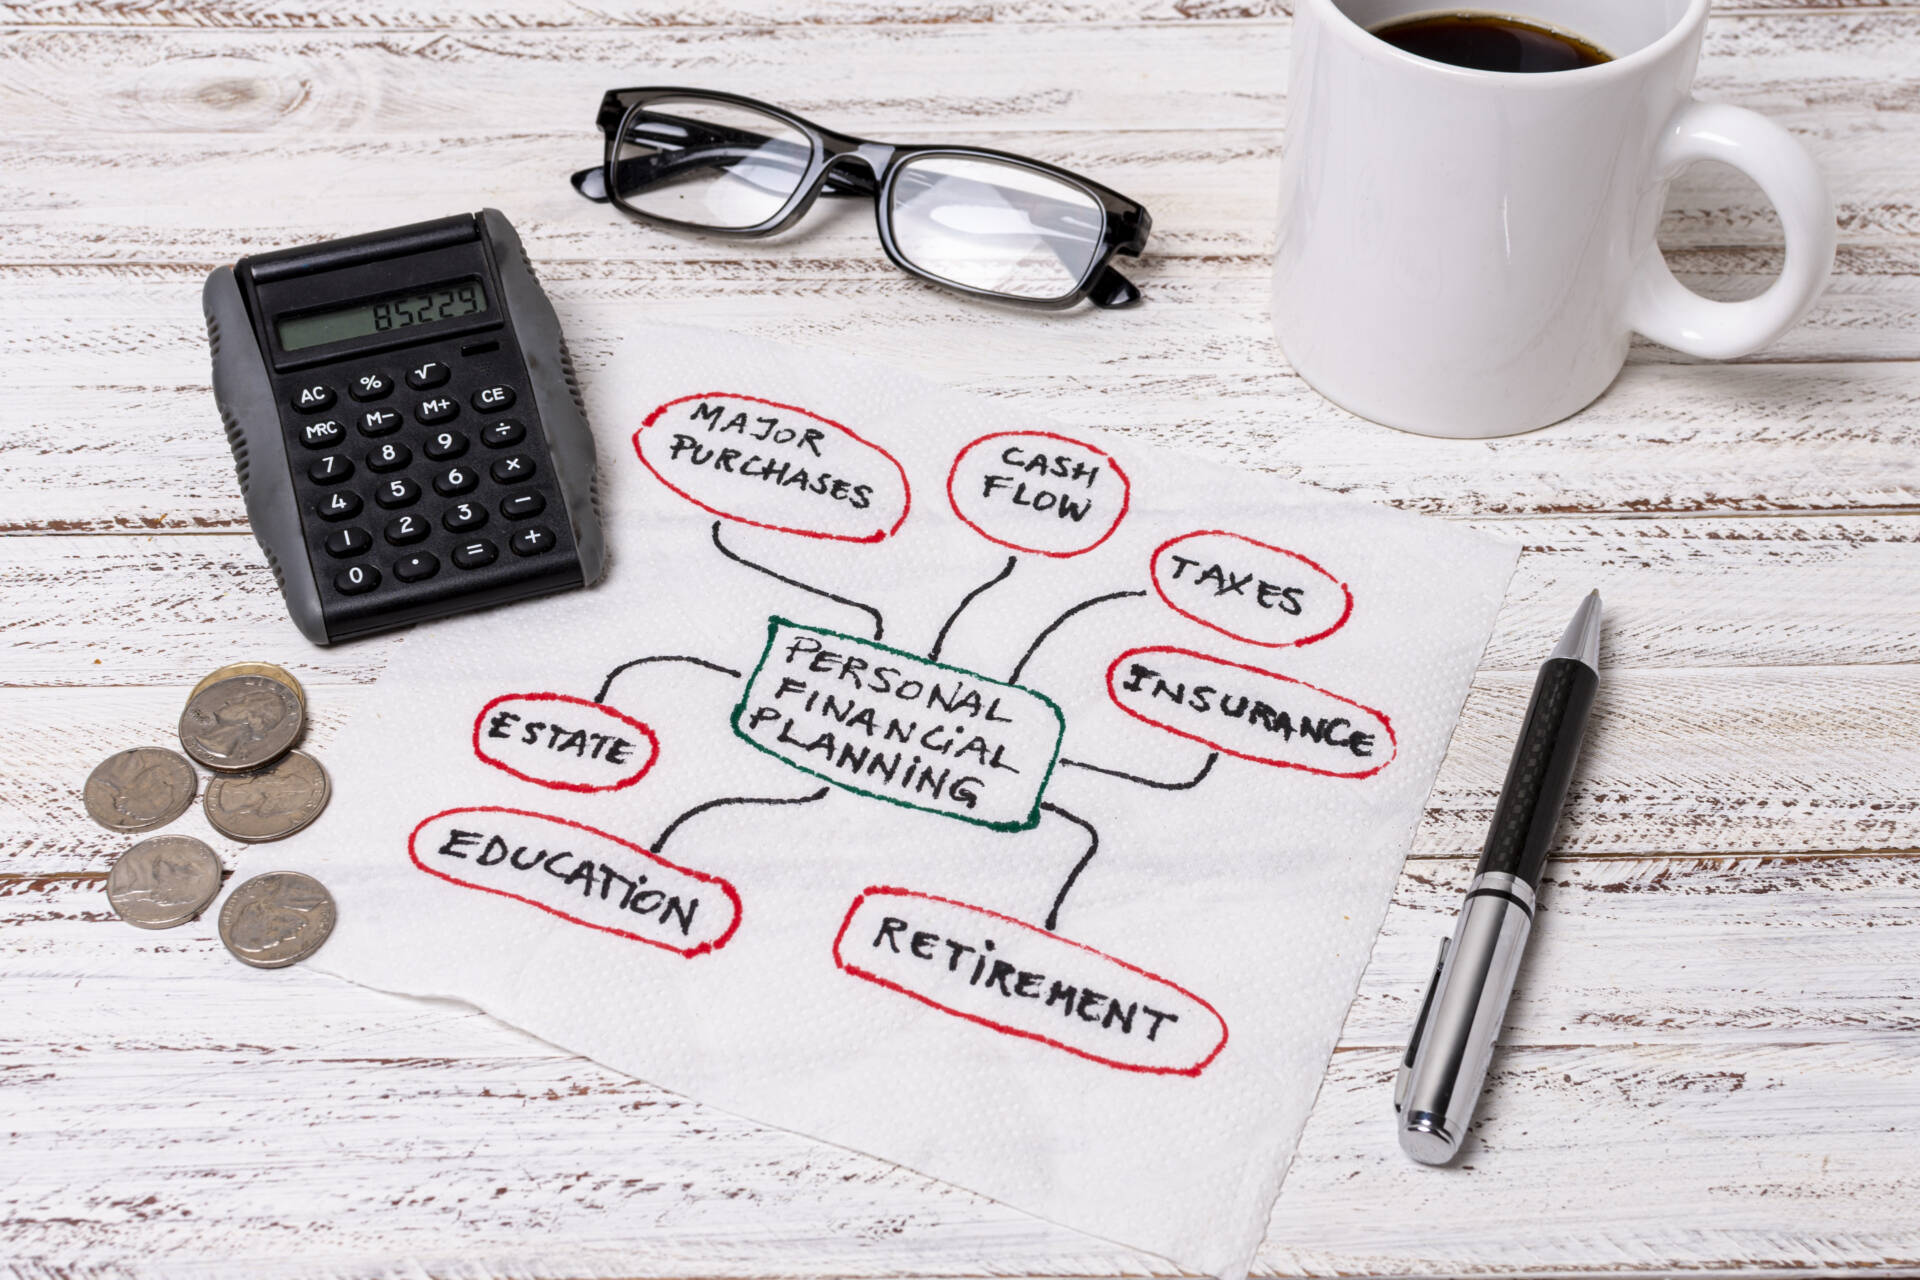 What Is Accounting Cycle And Why Accounting Is Important?